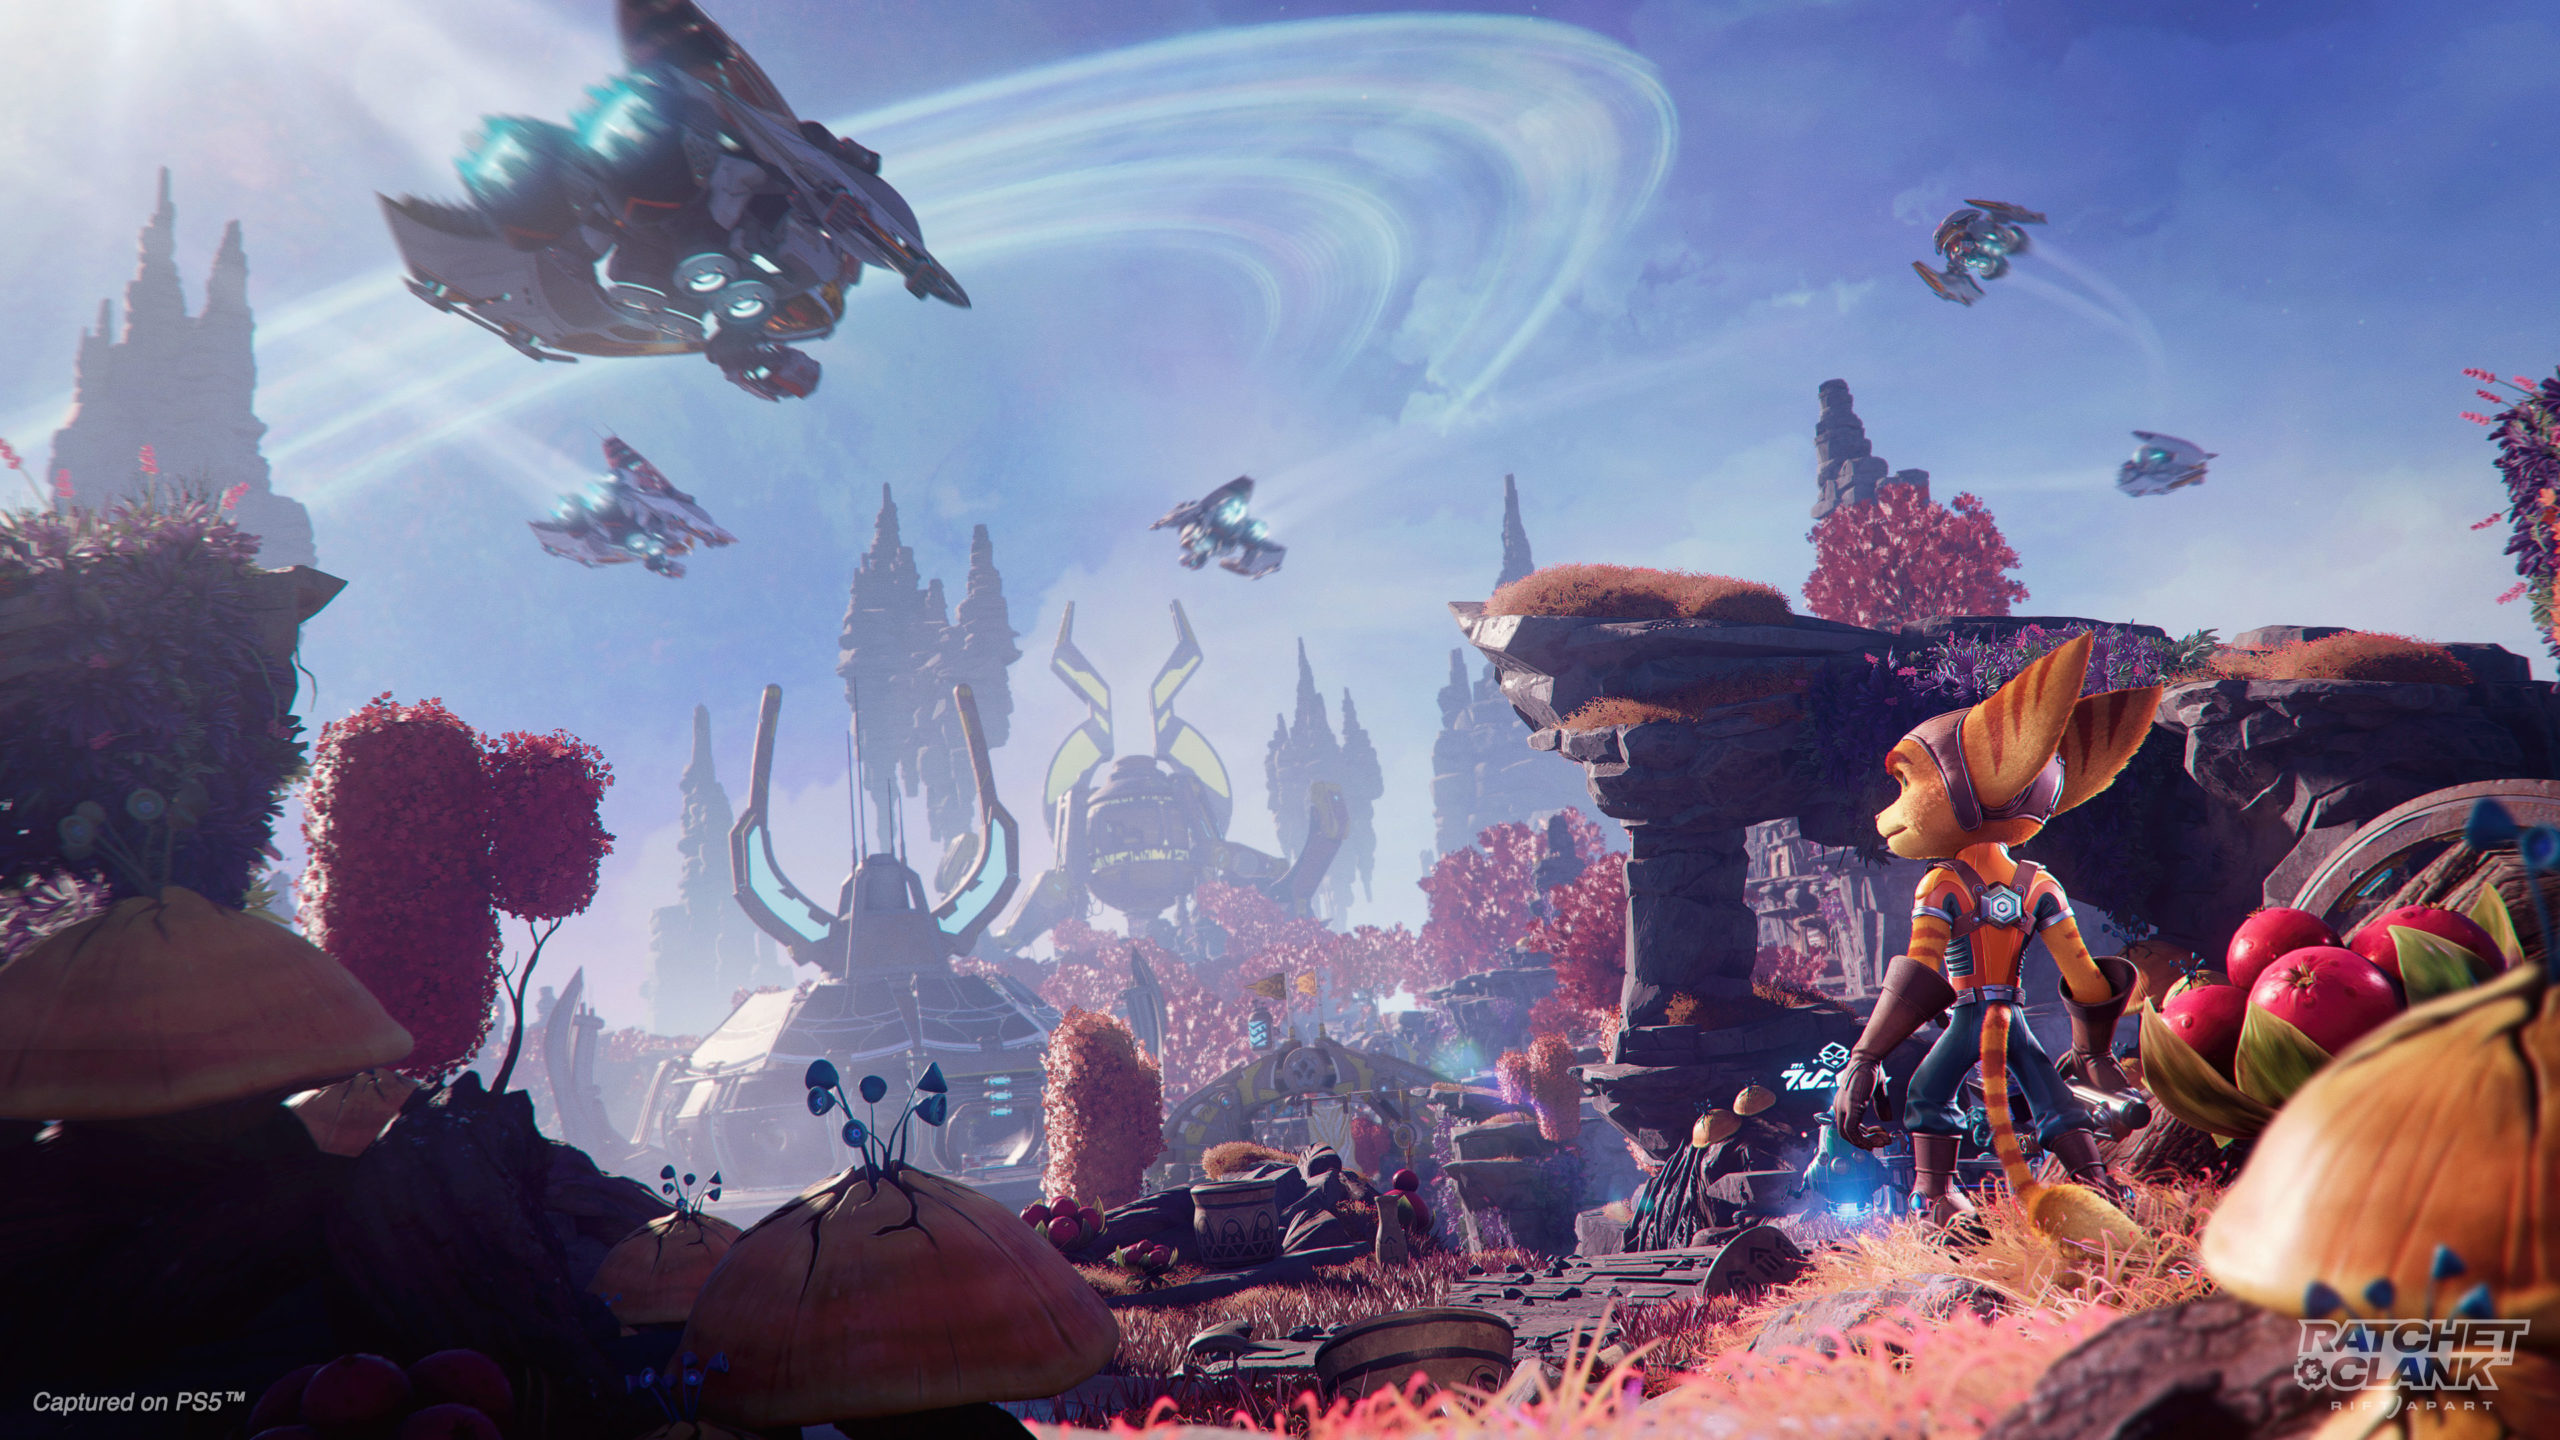 HD wallpaper featuring characters and scenery from the game Ratchet & Clank: Rift Apart, with vibrant landscapes and futuristic vehicles in flight.